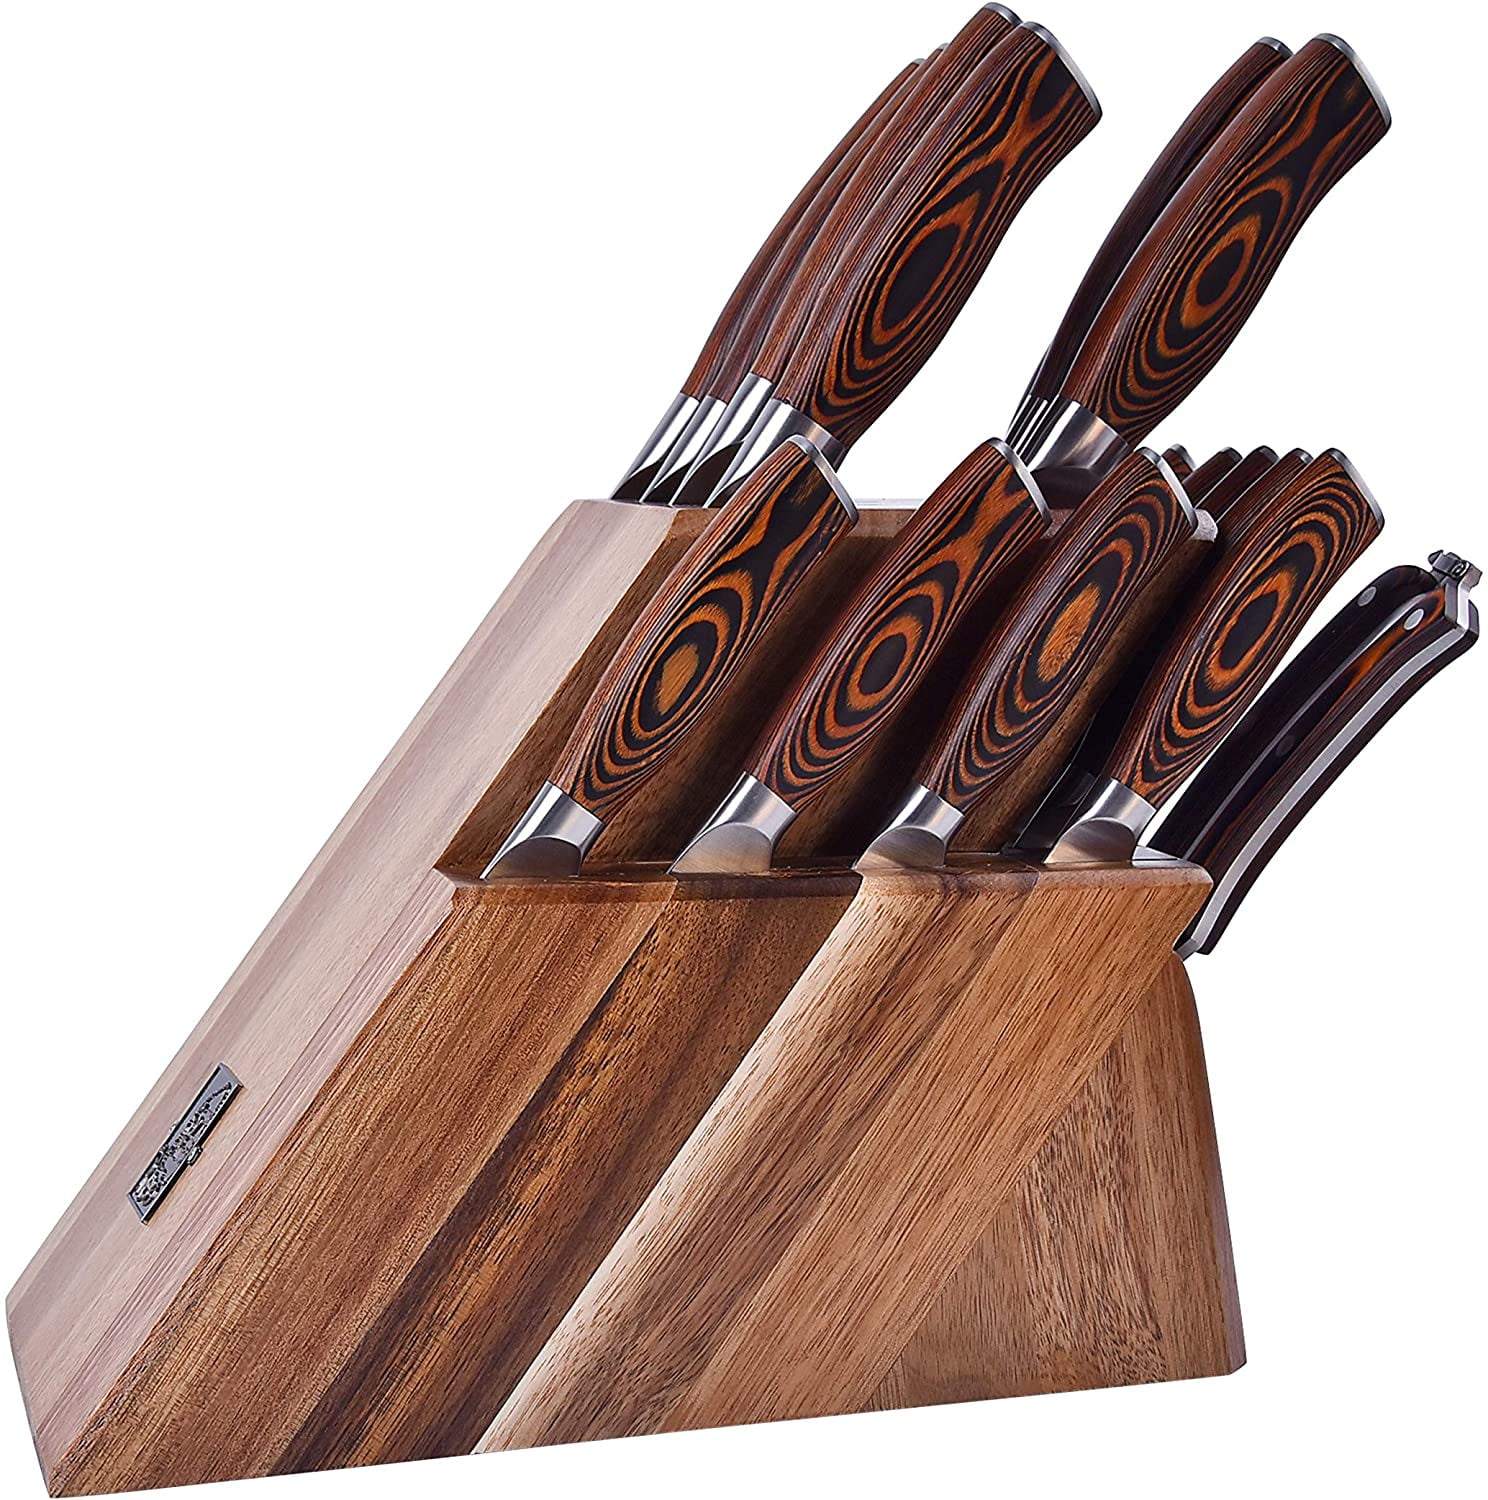 Tuo Cutlery Legacy 6pc Kitchen Knife Set